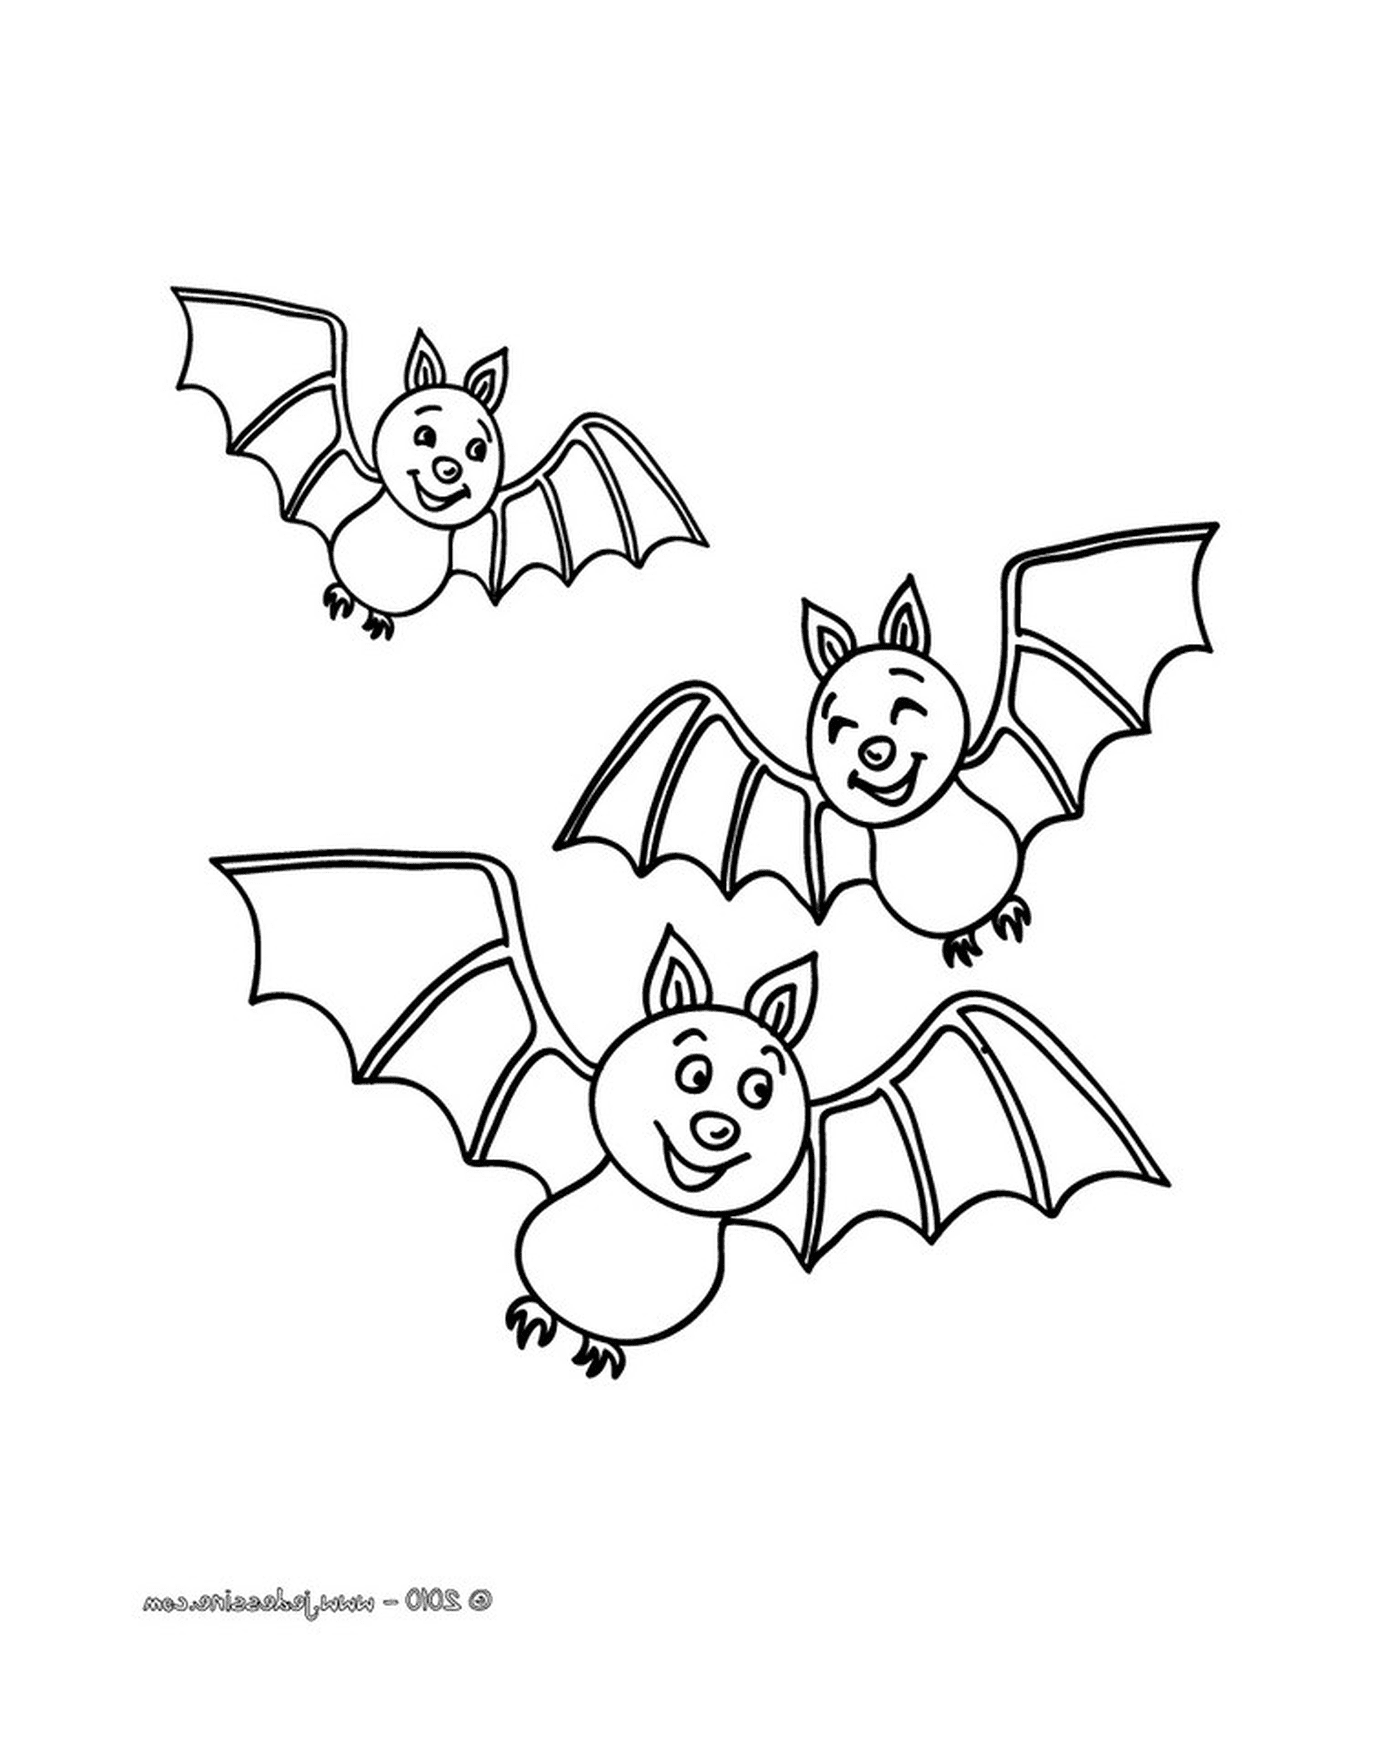  group of three flying bats for Halloween 